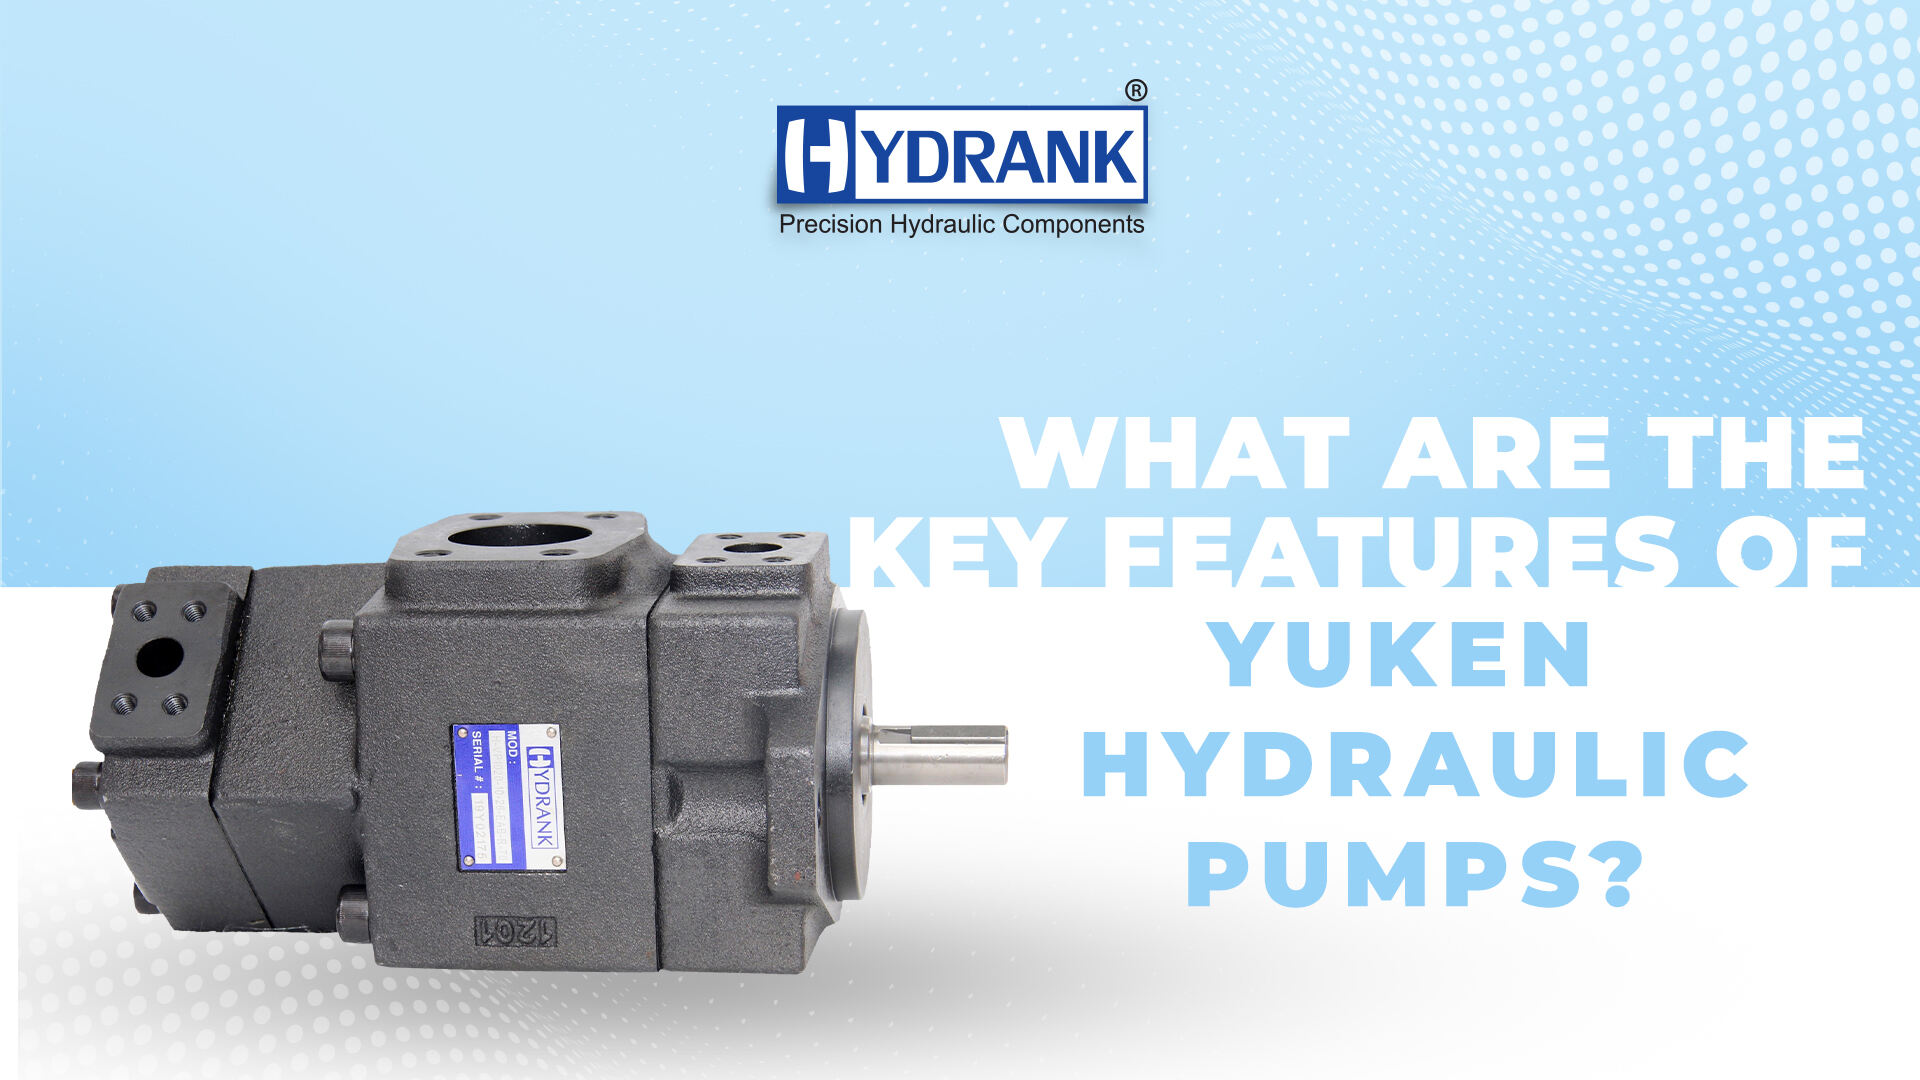 What are the Key Features of Yuken Hydraulic Pumps?